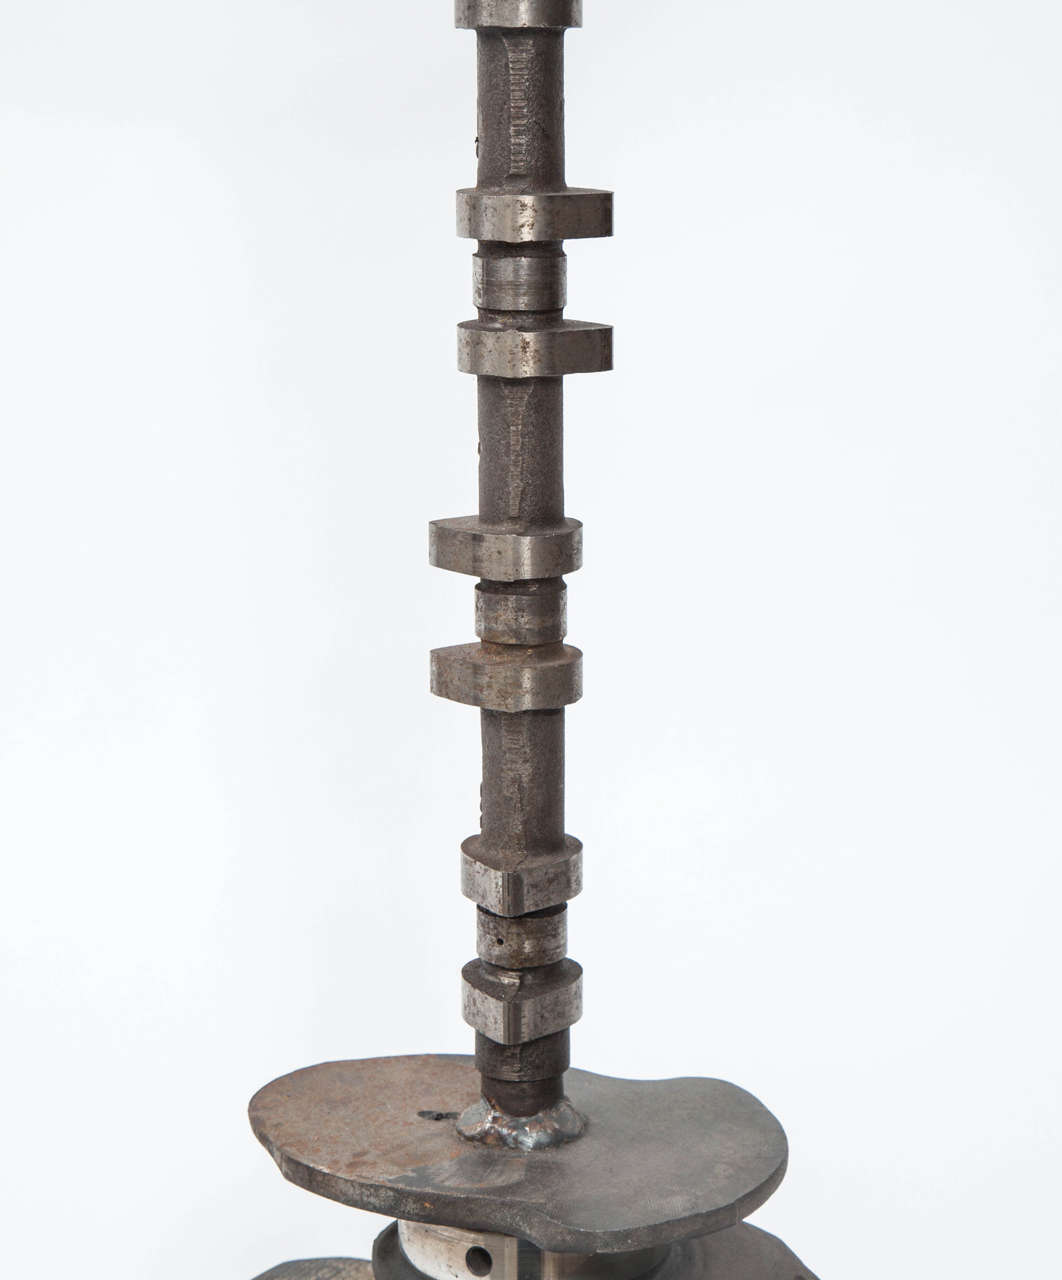 Mexican Glass and Iron Magiscope Sculpture by Feliciano Béjar, Mexico, 1980s For Sale